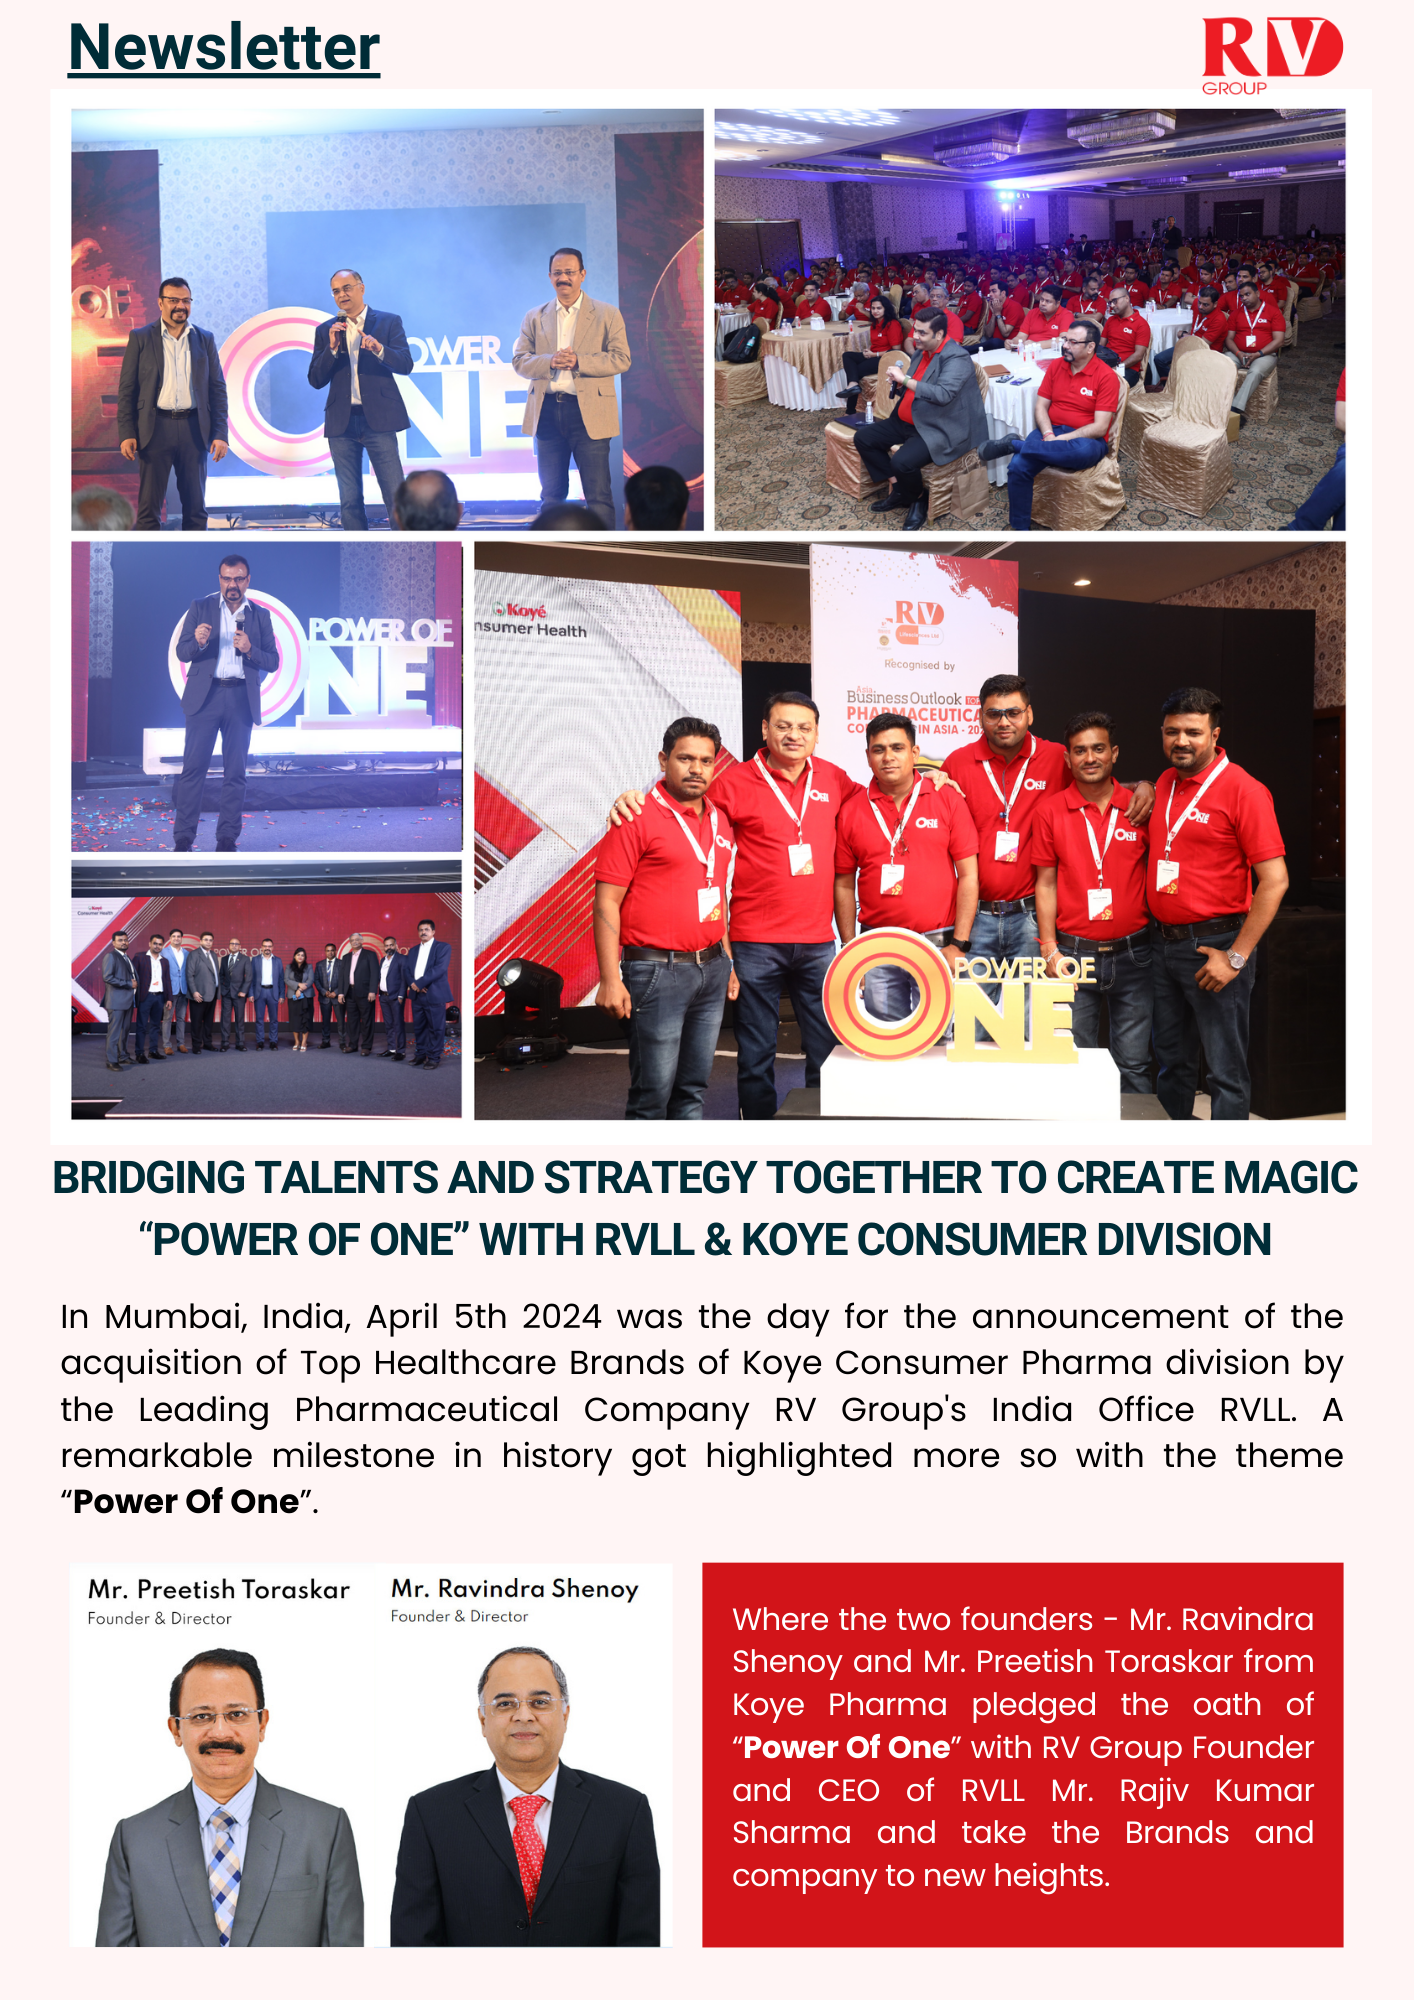 BRIDGING TALENTS AND STRATEGY TOGETHER TO CREATE MAGIC “POWER OF ONE” WITH RVLL & KOYE CONSUMER DIVISION